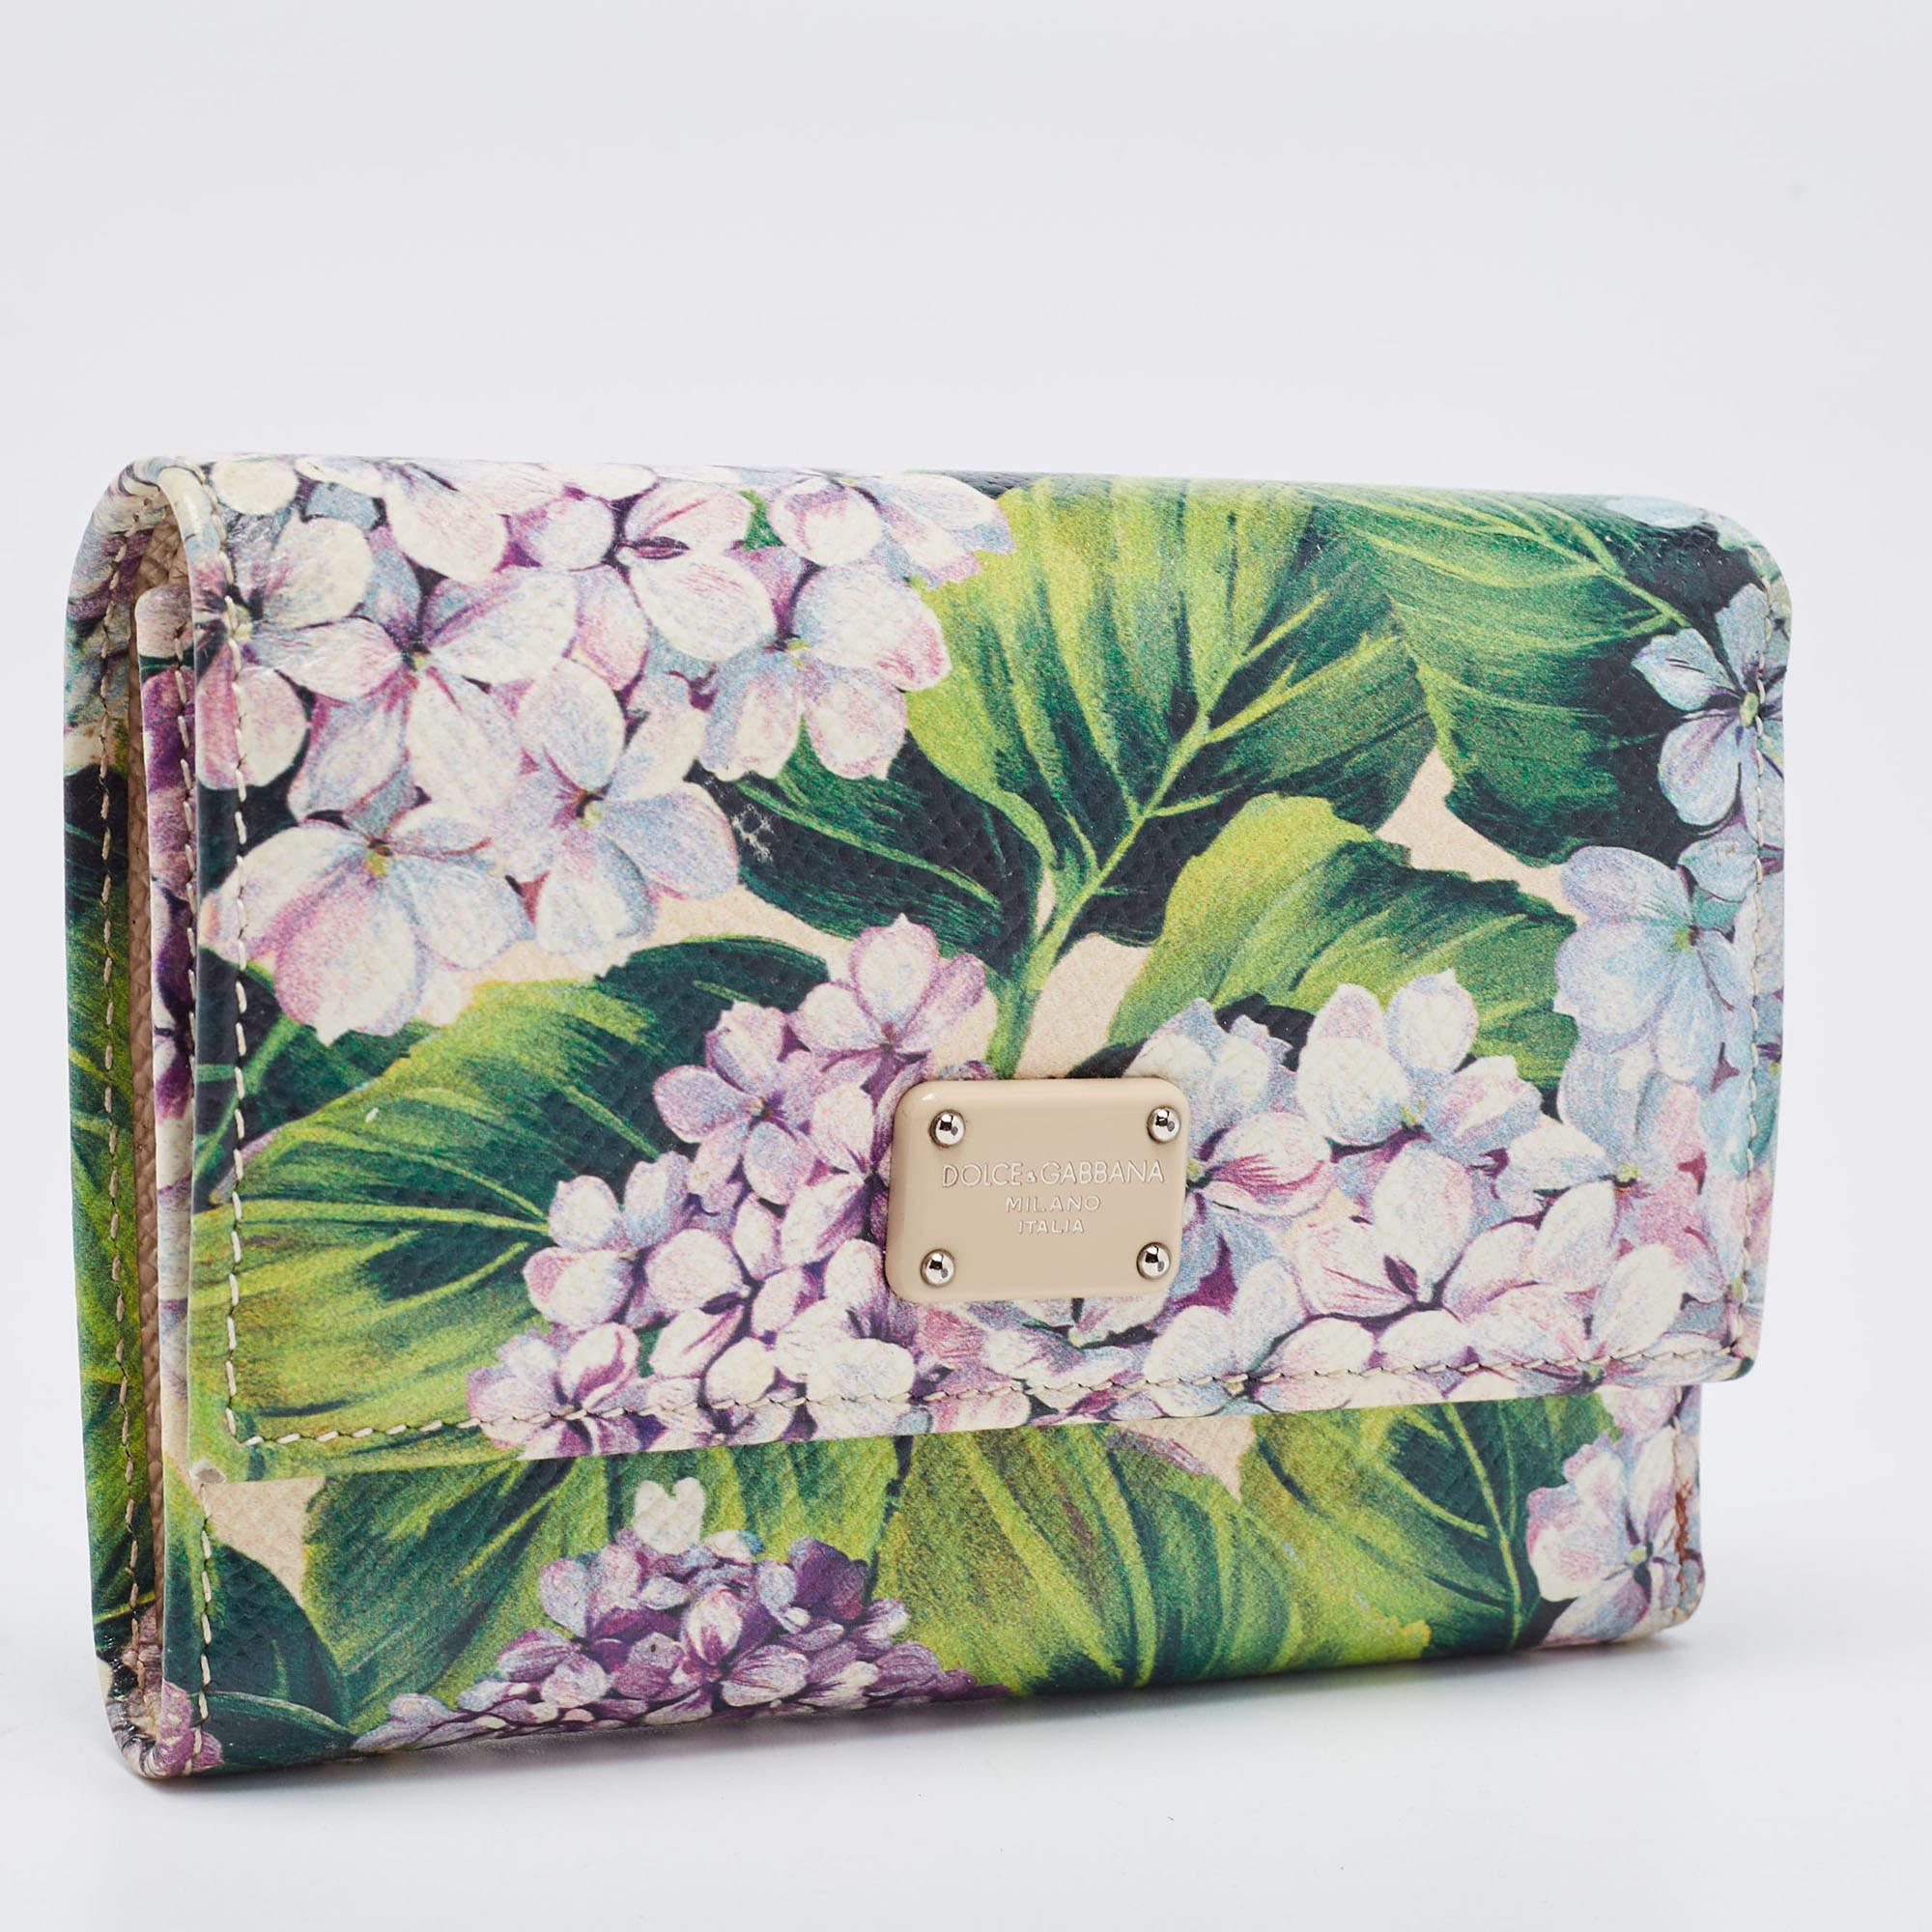 This beautiful Dolce & Gabbana trifold wallet is crafted from leather and features a lovely floral print. It opens to a leather and fabric lined interior that has a slot for you to arrange your currency and bills and a coin pocket. This sleek and